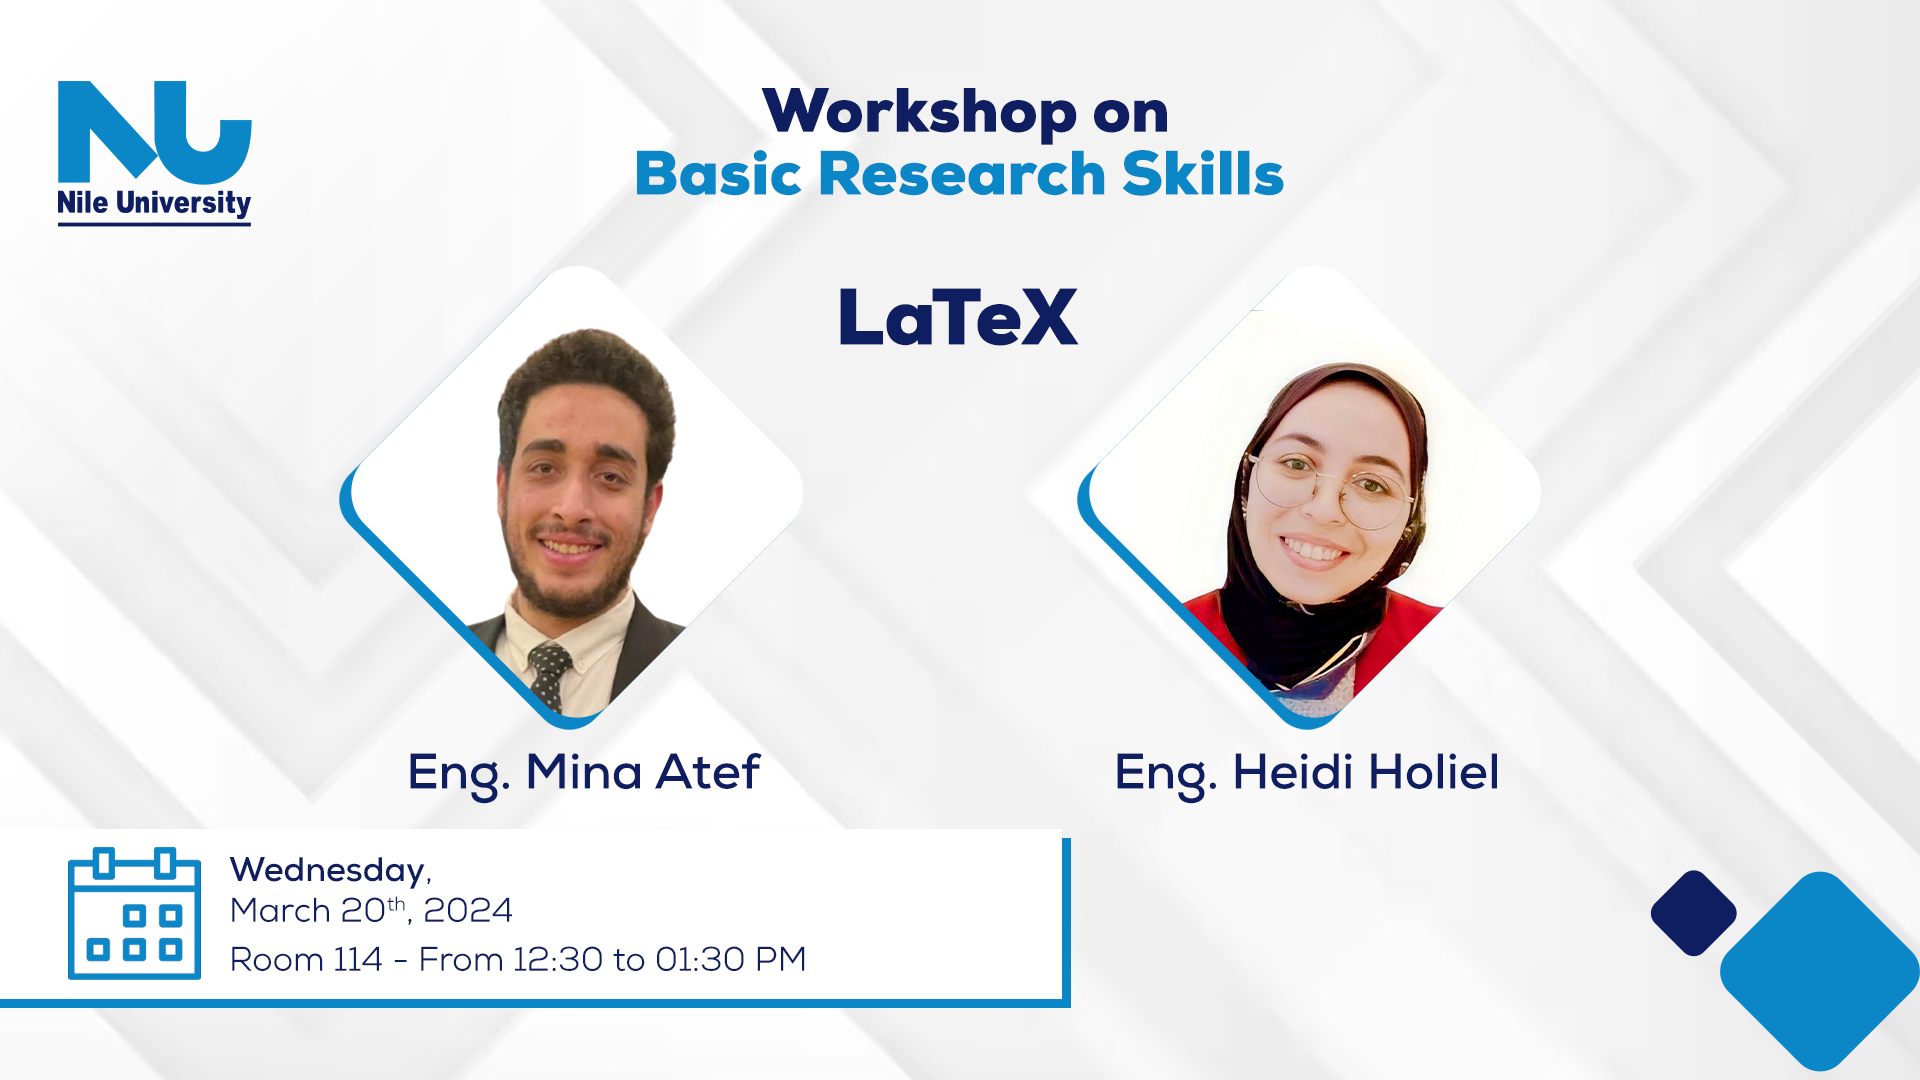 workshop about Basic Research Skills.